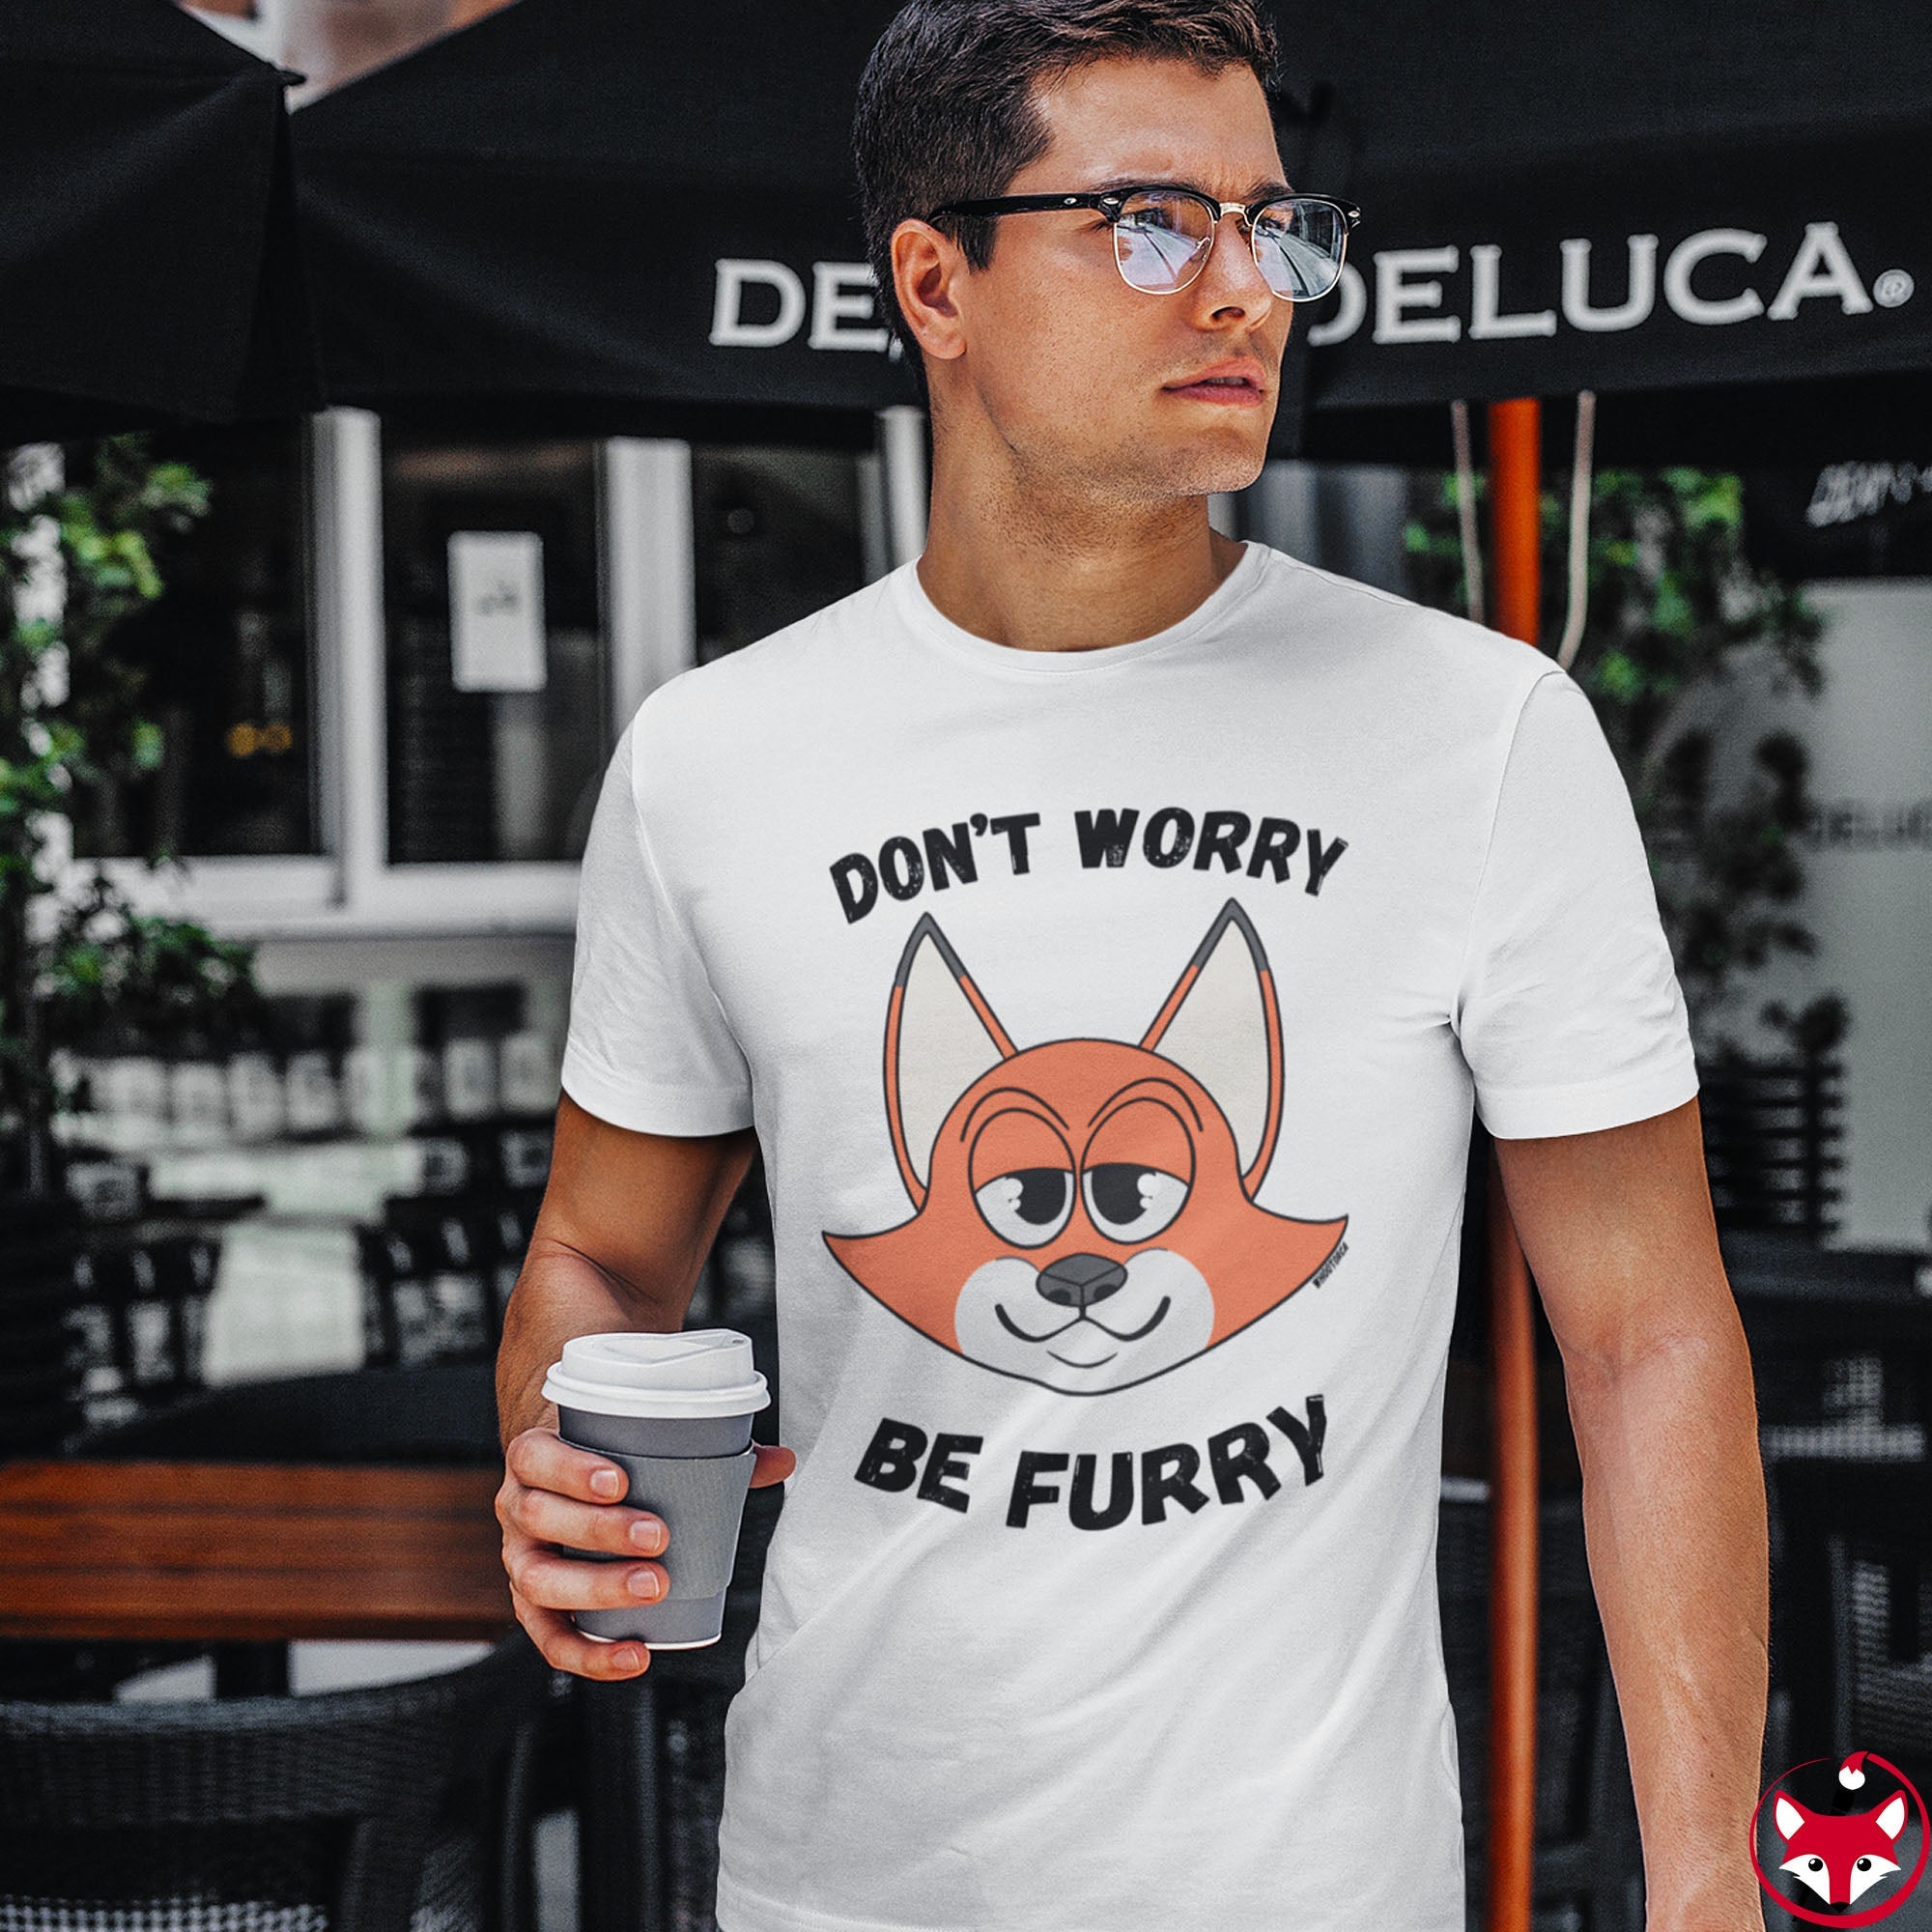 Don't Worry Be Furry! - T-Shirt T-Shirt AFLT-Whootorca 